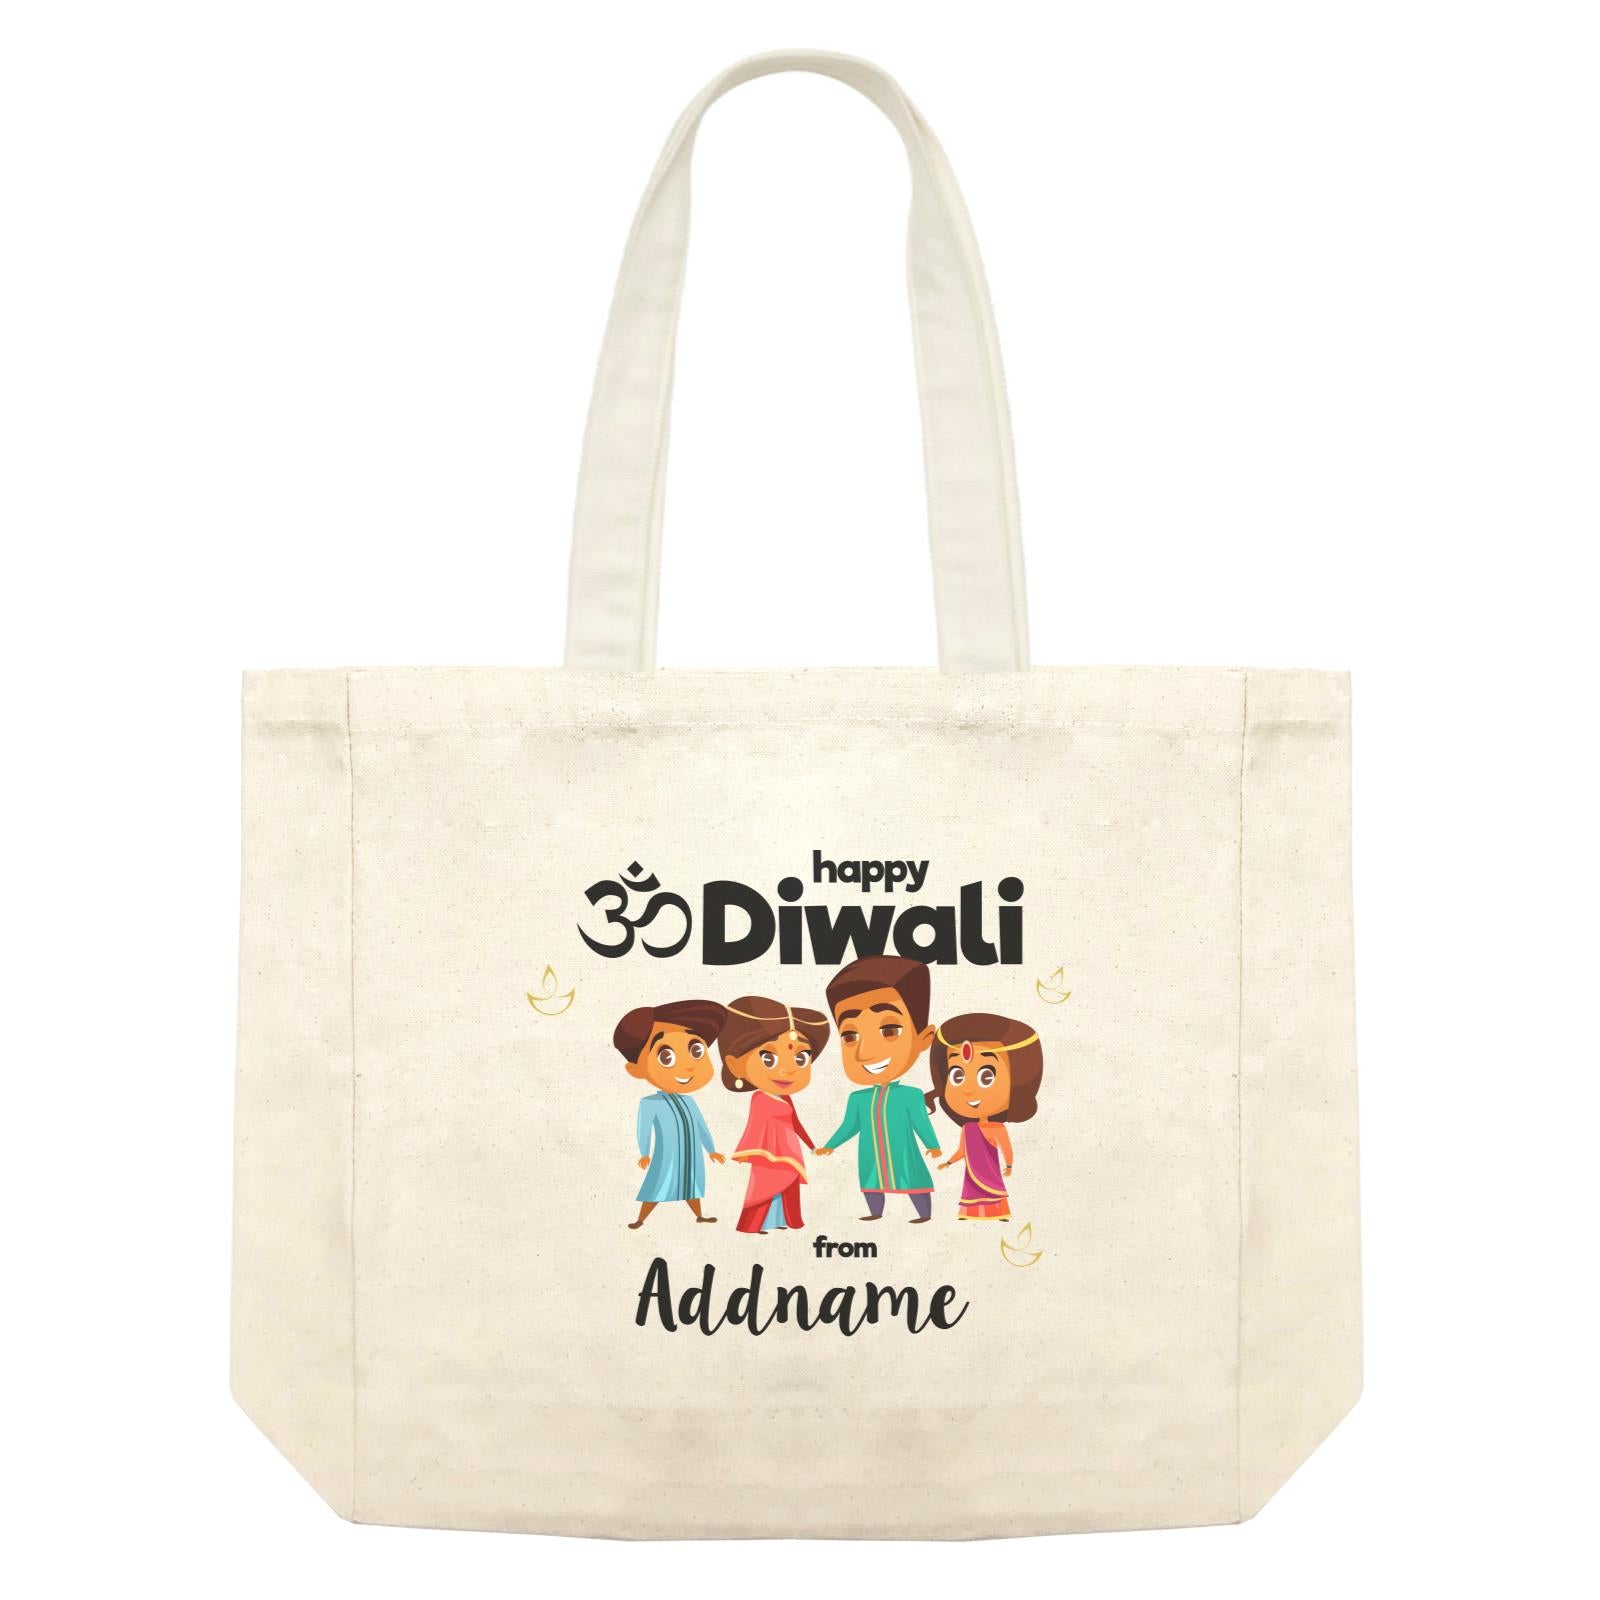 Cute Family Of Four OM Happy Diwali From Addname Shopping Bag